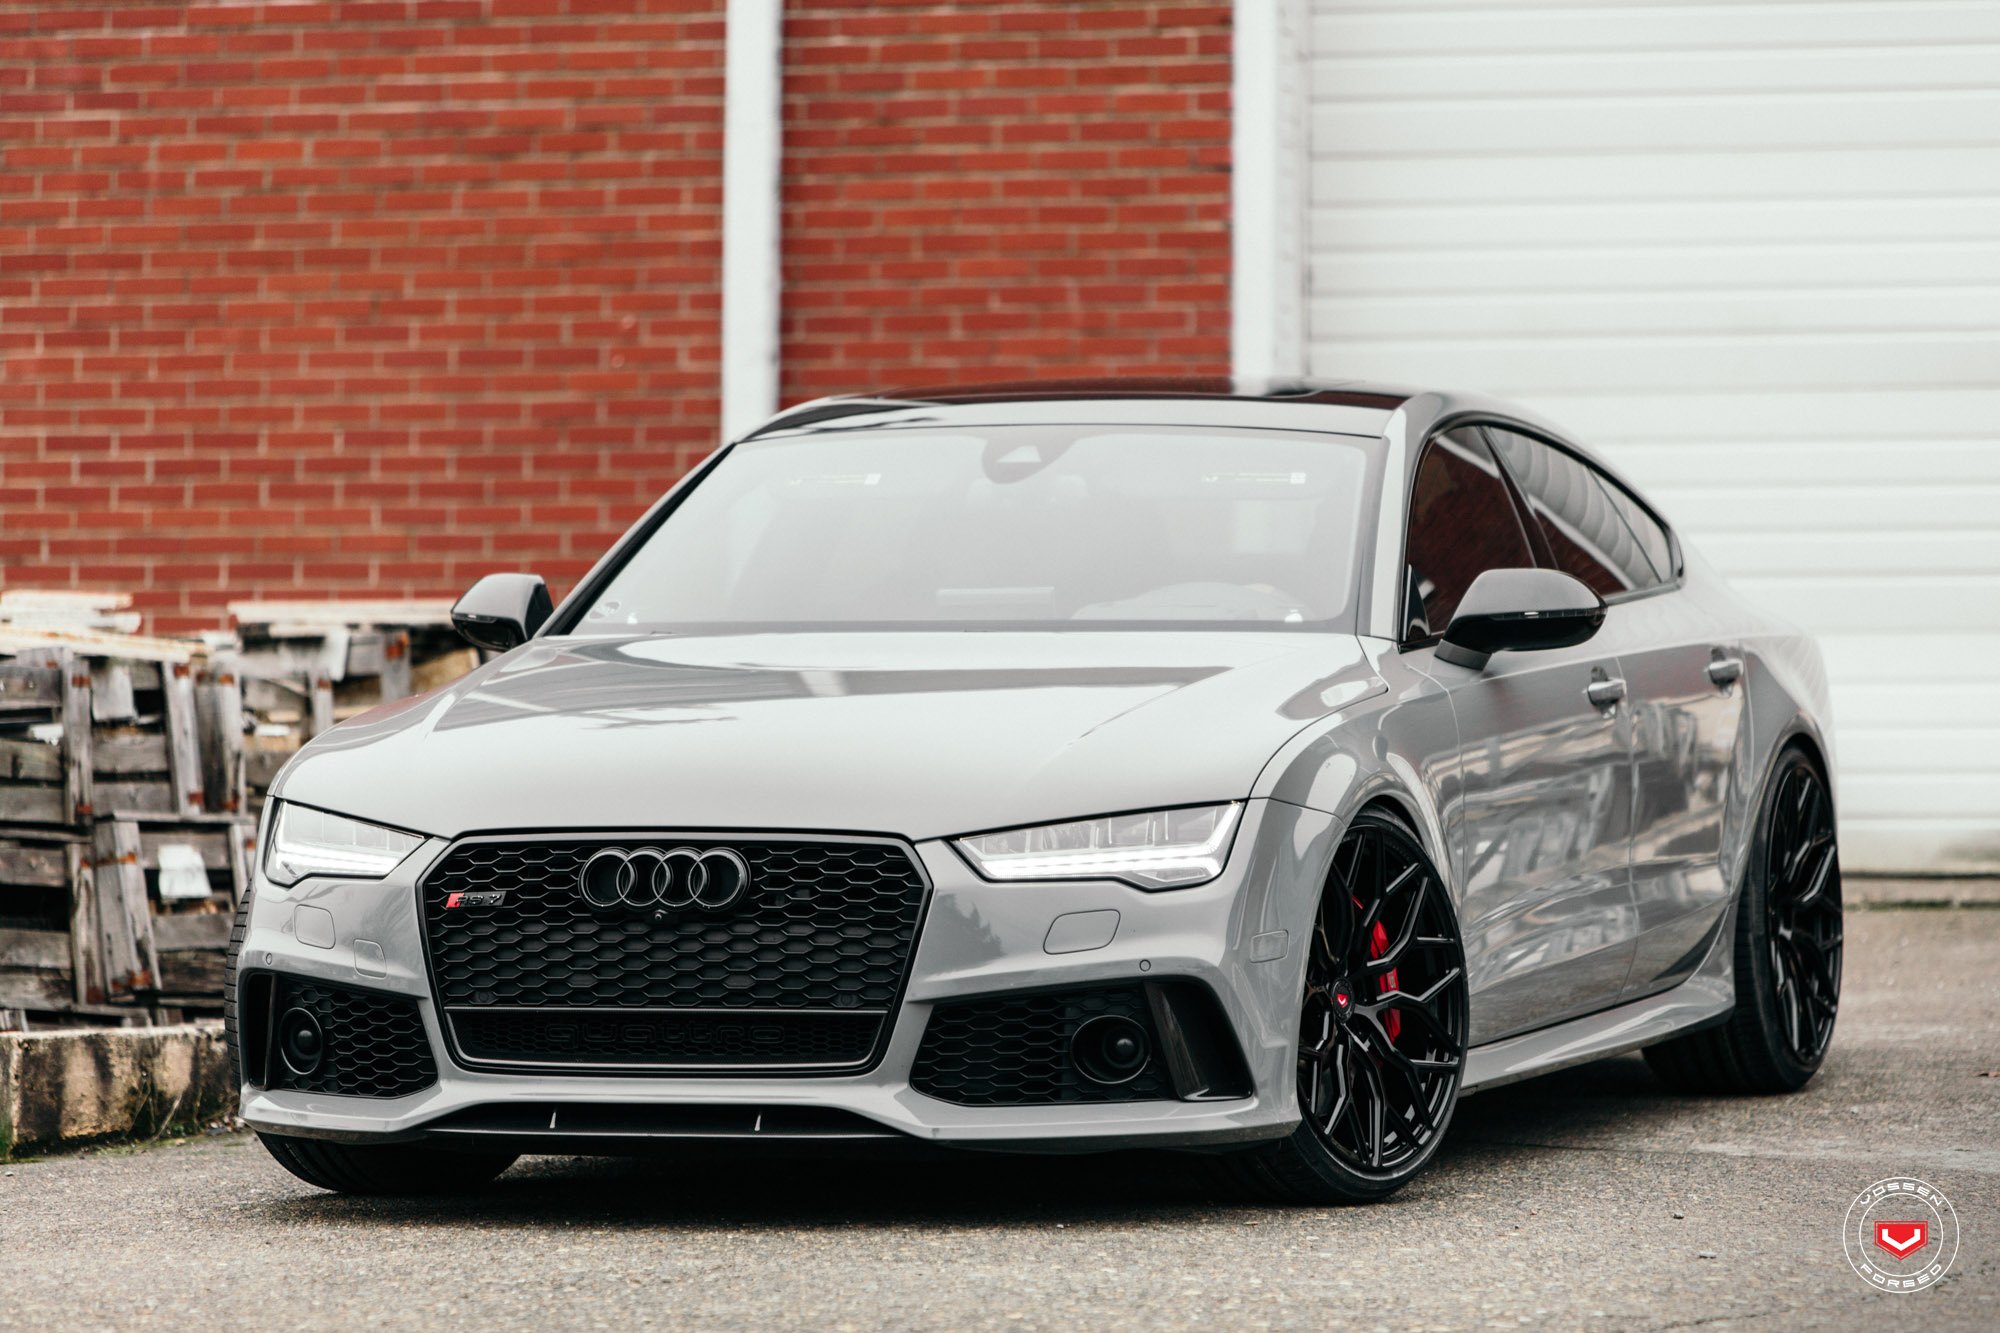 Front Bumper with Fog Lights on Gray Audi A7 - Photo by Vossen